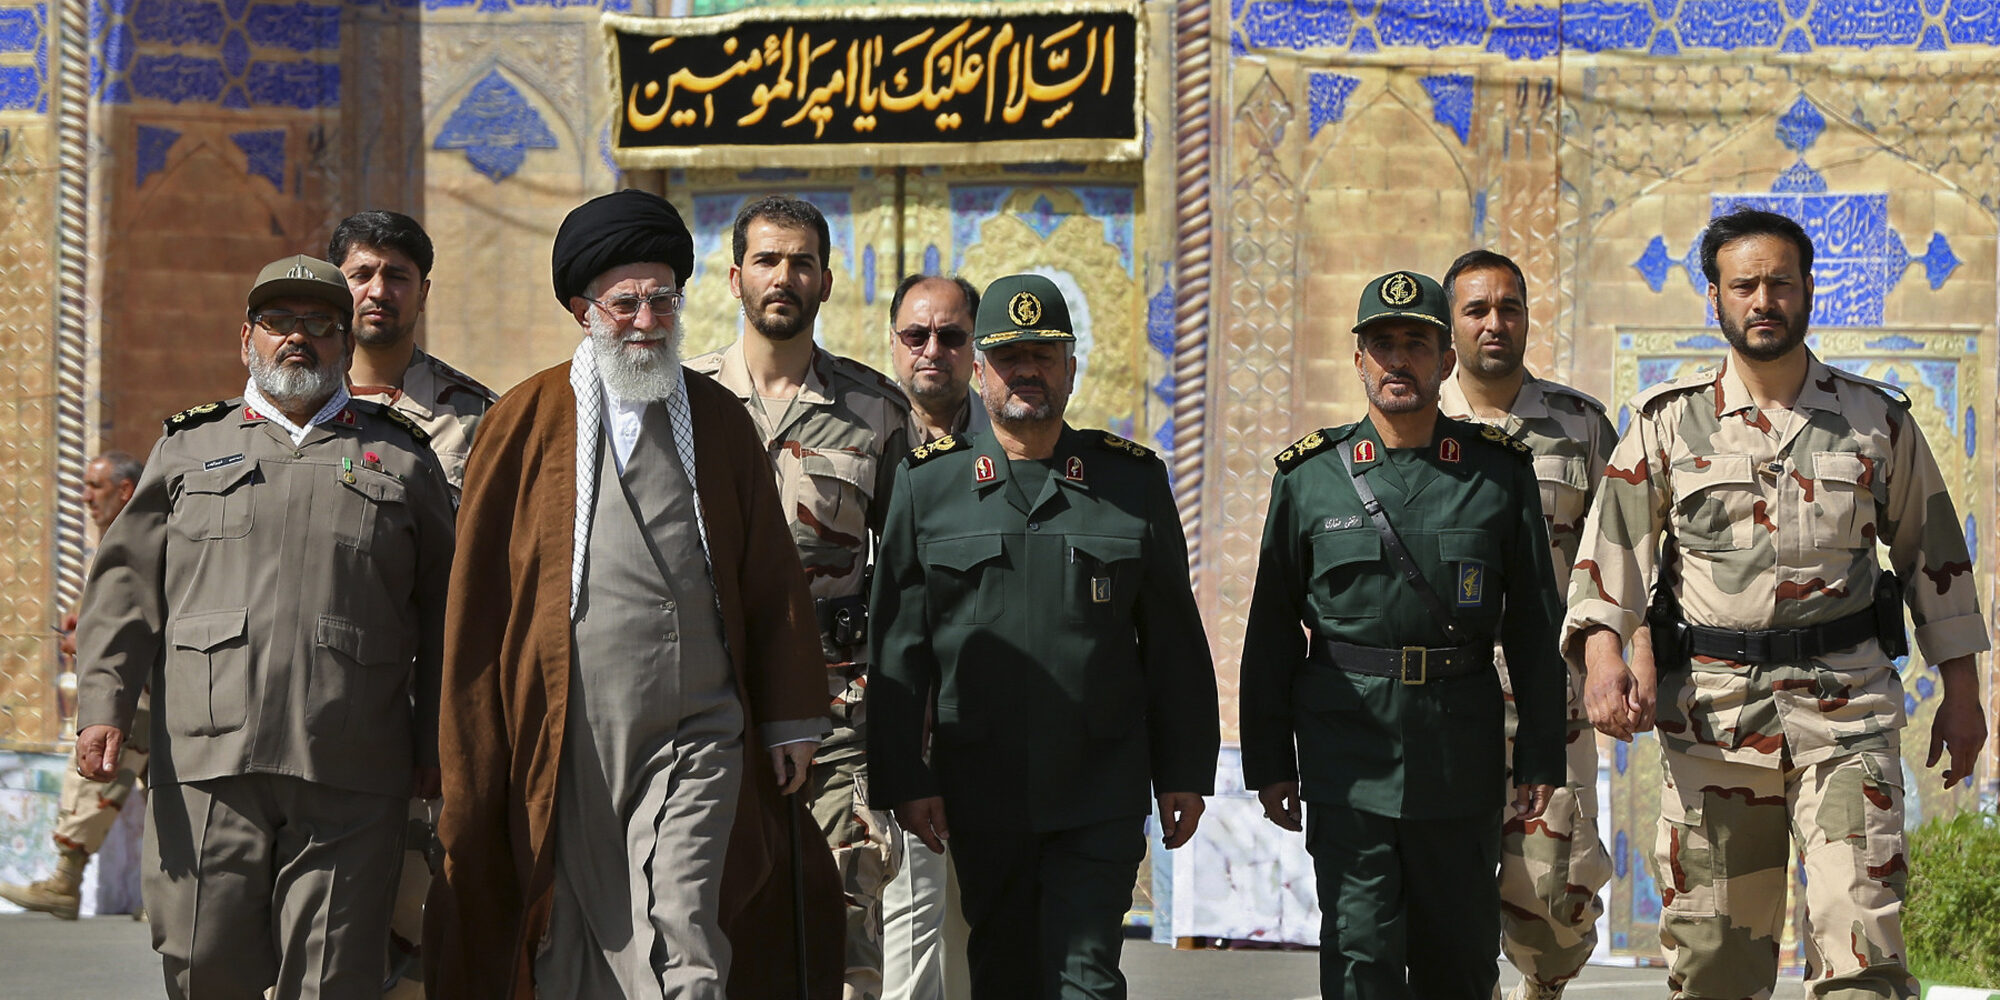 In this picture released by an official website of the office of the Iranian supreme leader on Wednesday, May 20, 2015, Supreme Leader Ayatollah Ali Khamenei, second left, attends a graduation ceremony of Revolutionary Guard officers in Tehran, Iran, as he is accompanied by Chief of the General Staff of Iran's Armed Forces, Hasan Firouzabadi, left, and Revolutionary Guard commander Mohammad Ali Jafar, center. Iran's supreme leader vowed Wednesday he will not allow international inspection of Iran's military sites or access to Iranian scientists under any nuclear agreement with world powers. (Office of the Iranian Supreme Leader via AP)